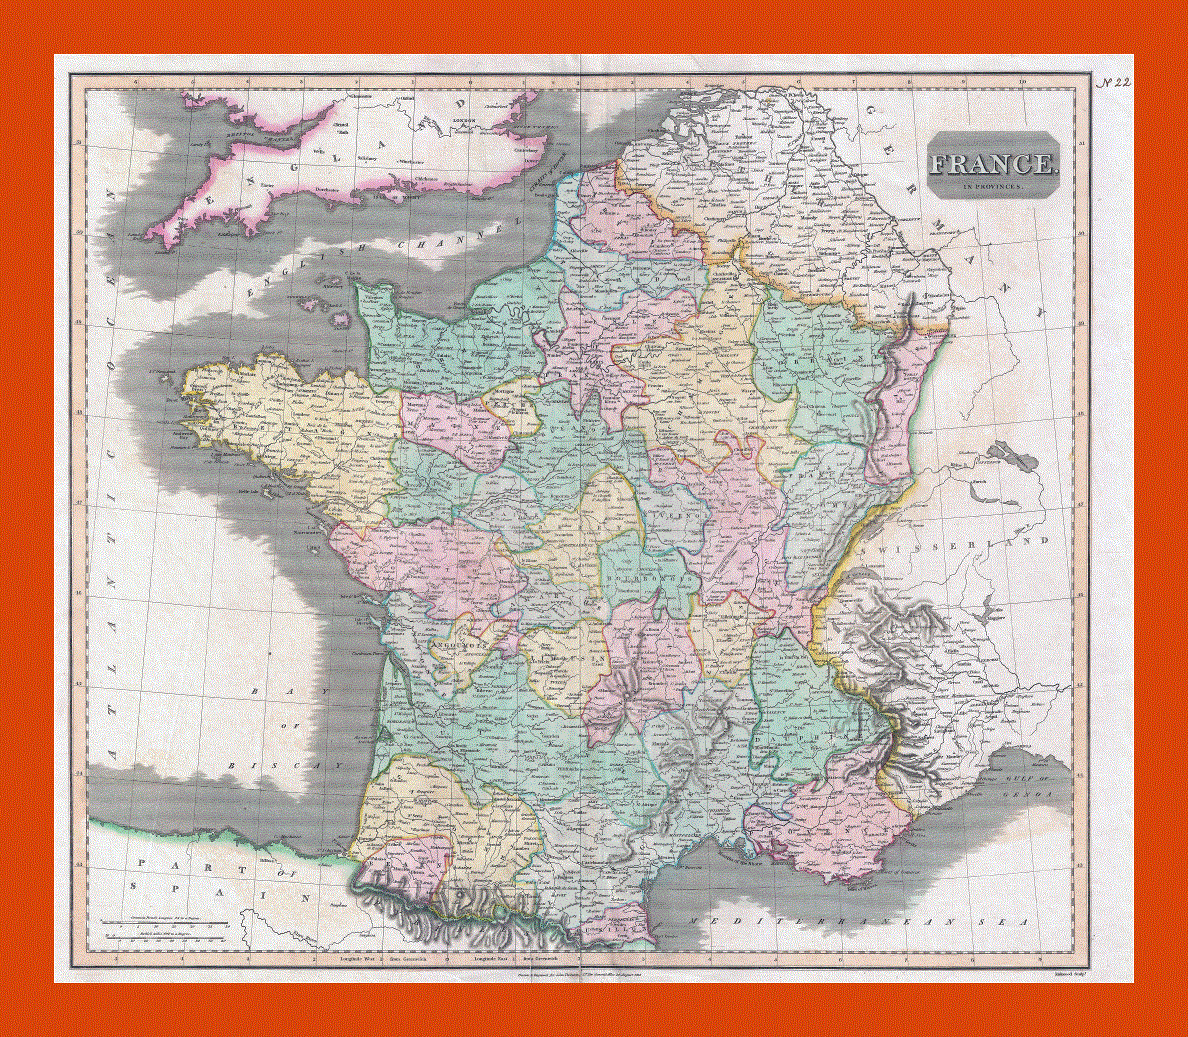 Old political and administrative map of France - 1814